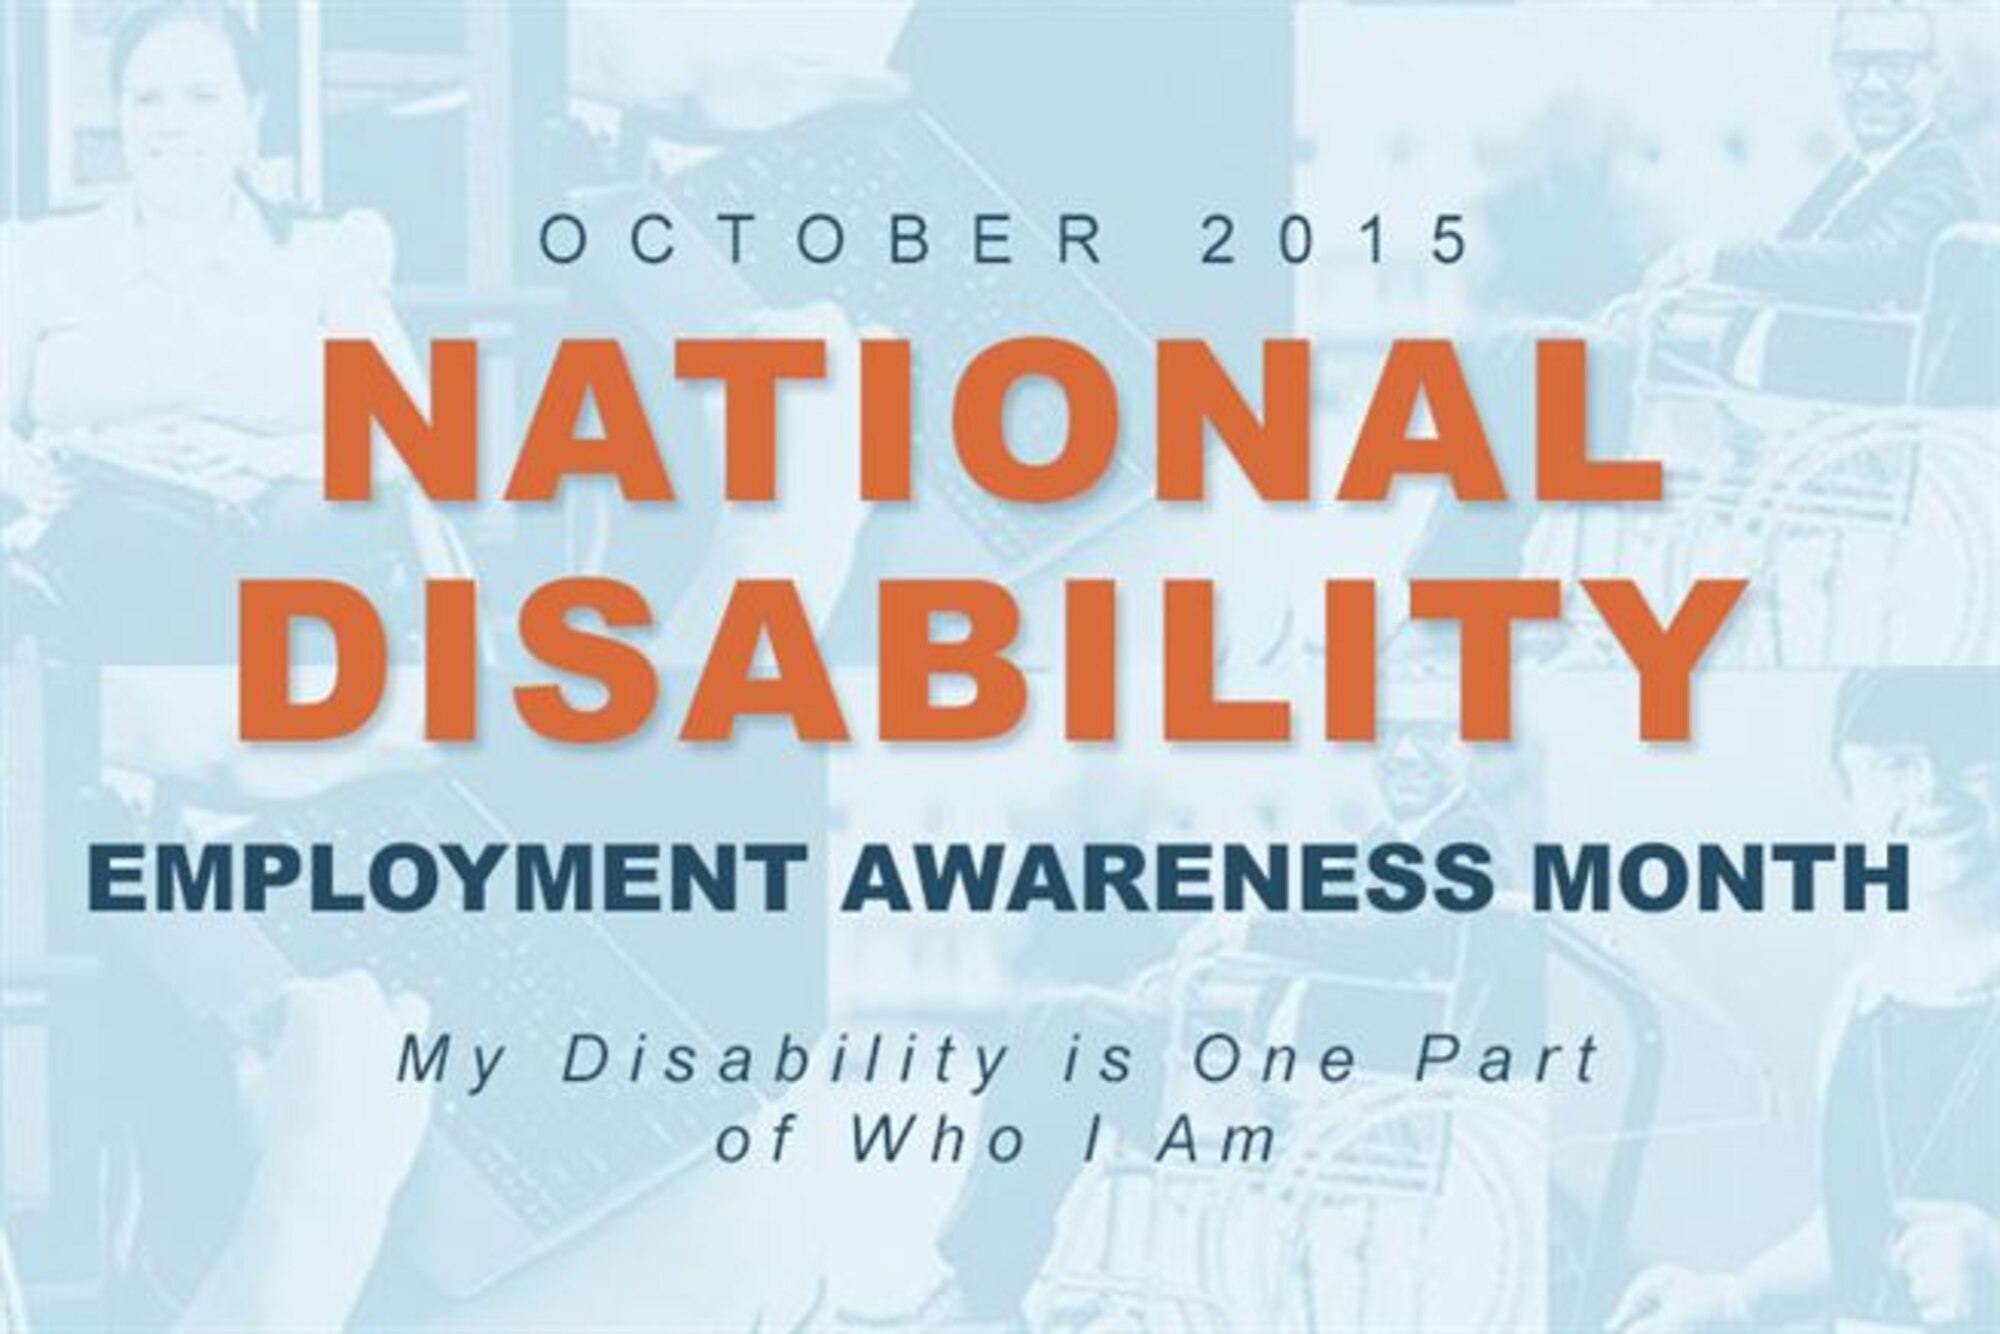 Held each October, National Disability Employment Awareness Month is a national campaign that raises awareness about disability employment issues and celebrates the many and varied contributions of America's workers with disabilities.